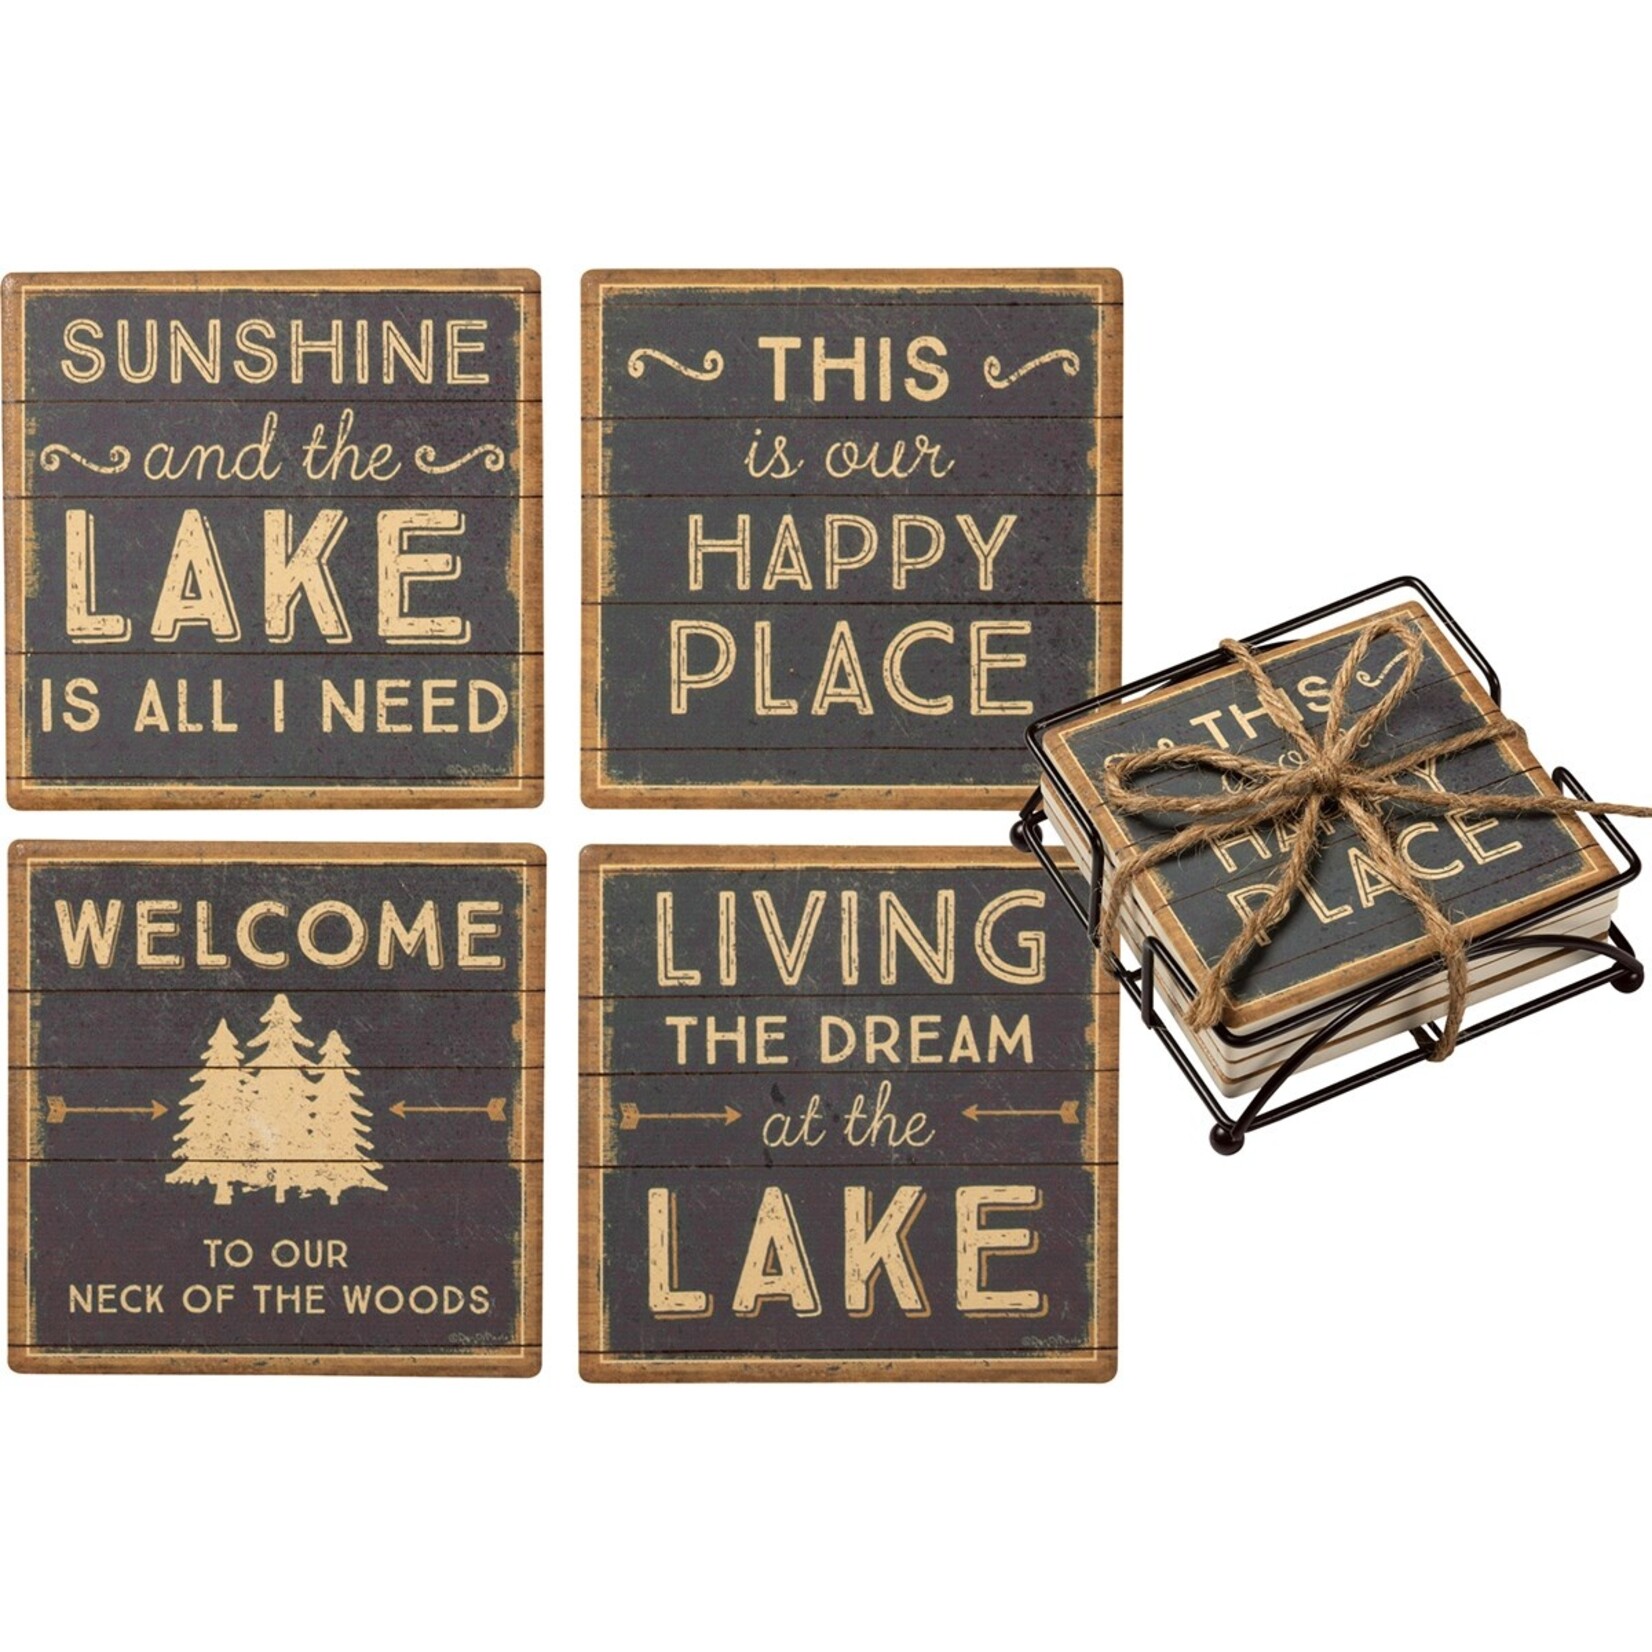 Primitives by Kathy Primitives by Kathy- This Is Our Happy Place - Lake Coaster